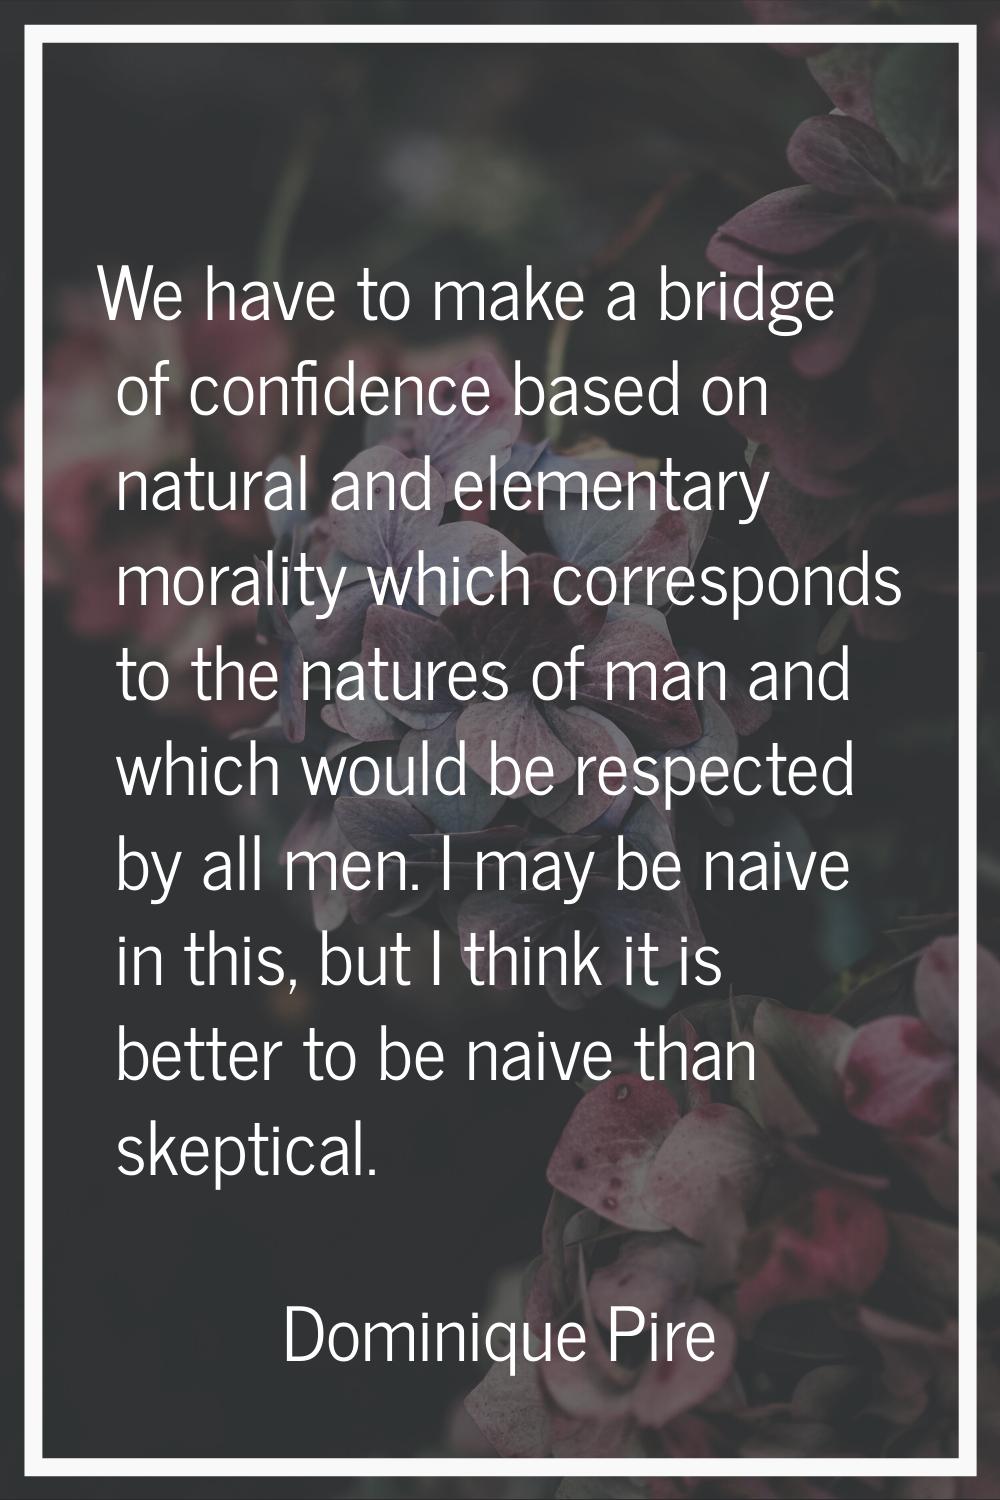 We have to make a bridge of confidence based on natural and elementary morality which corresponds t